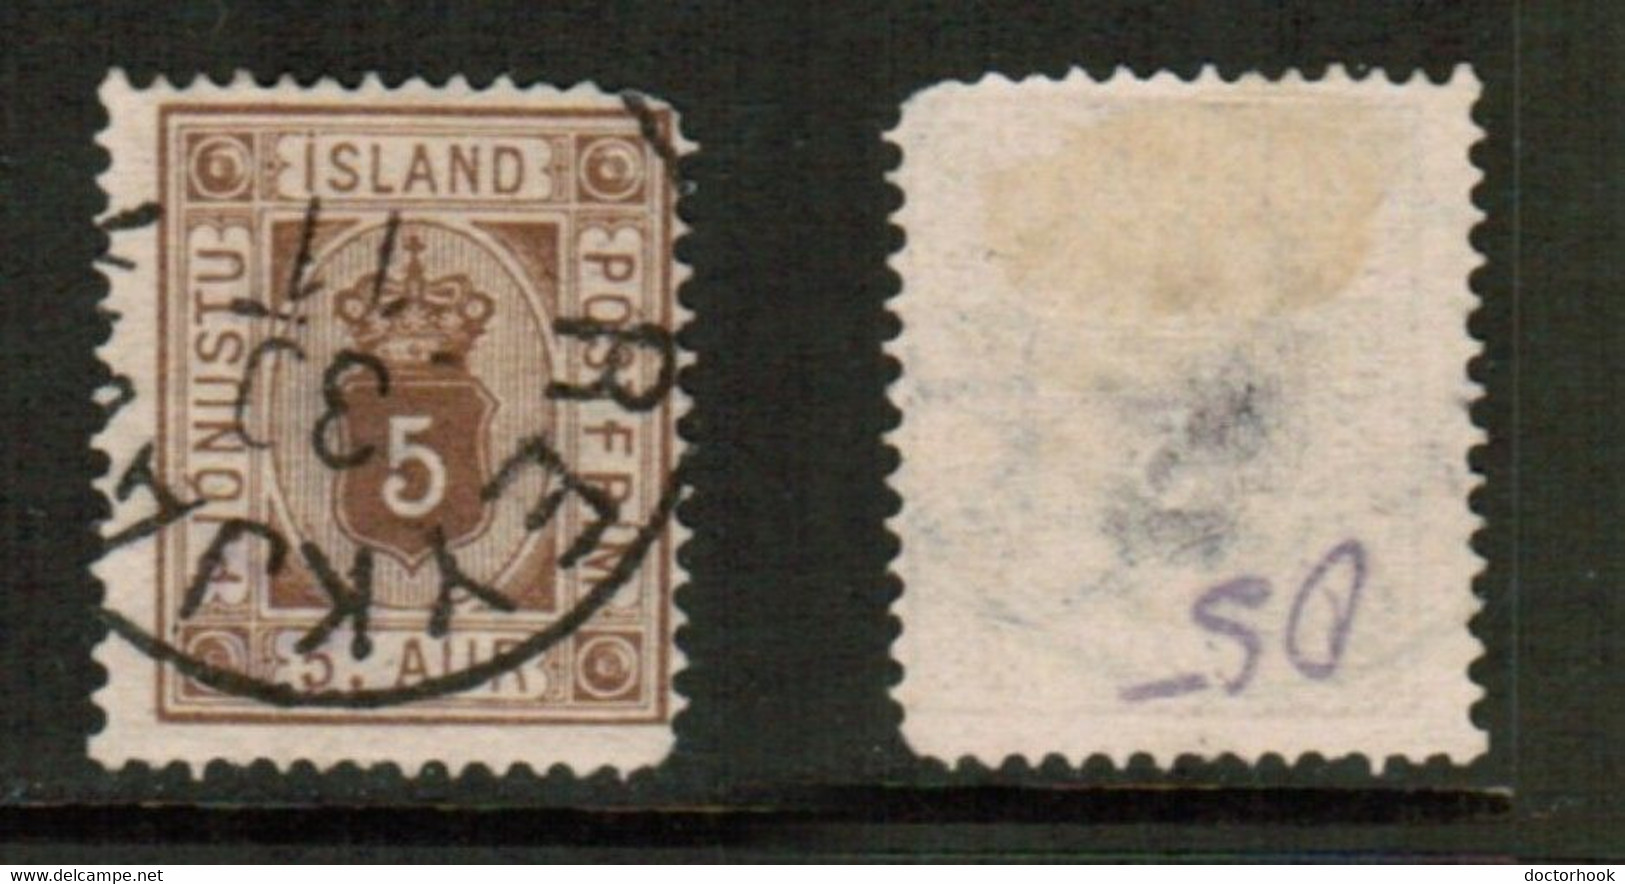 DENMARK   Scott # O 5 USED (CONDITION AS PER SCAN) (Stamp Scan # 867-18) - Oficiales